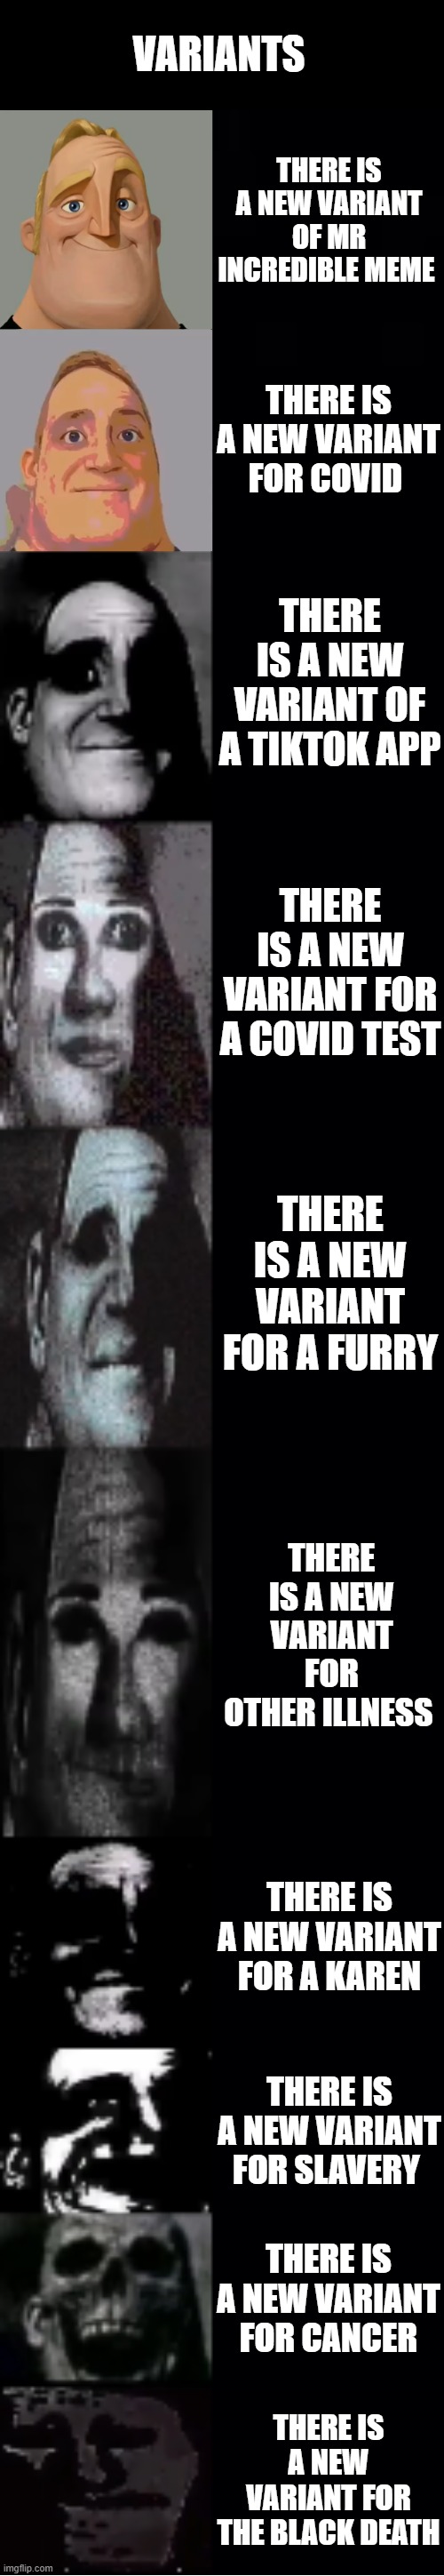 mr increblie become uncanny: variants | VARIANTS; THERE IS A NEW VARIANT OF MR INCREDIBLE MEME; THERE IS A NEW VARIANT FOR COVID; THERE IS A NEW VARIANT OF A TIKTOK APP; THERE IS A NEW VARIANT FOR A COVID TEST; THERE IS A NEW VARIANT FOR A FURRY; THERE IS A NEW VARIANT FOR OTHER ILLNESS; THERE IS A NEW VARIANT FOR A KAREN; THERE IS A NEW VARIANT FOR SLAVERY; THERE IS A NEW VARIANT FOR CANCER; THERE IS A NEW VARIANT FOR THE BLACK DEATH | image tagged in mr incredible becoming uncanny | made w/ Imgflip meme maker